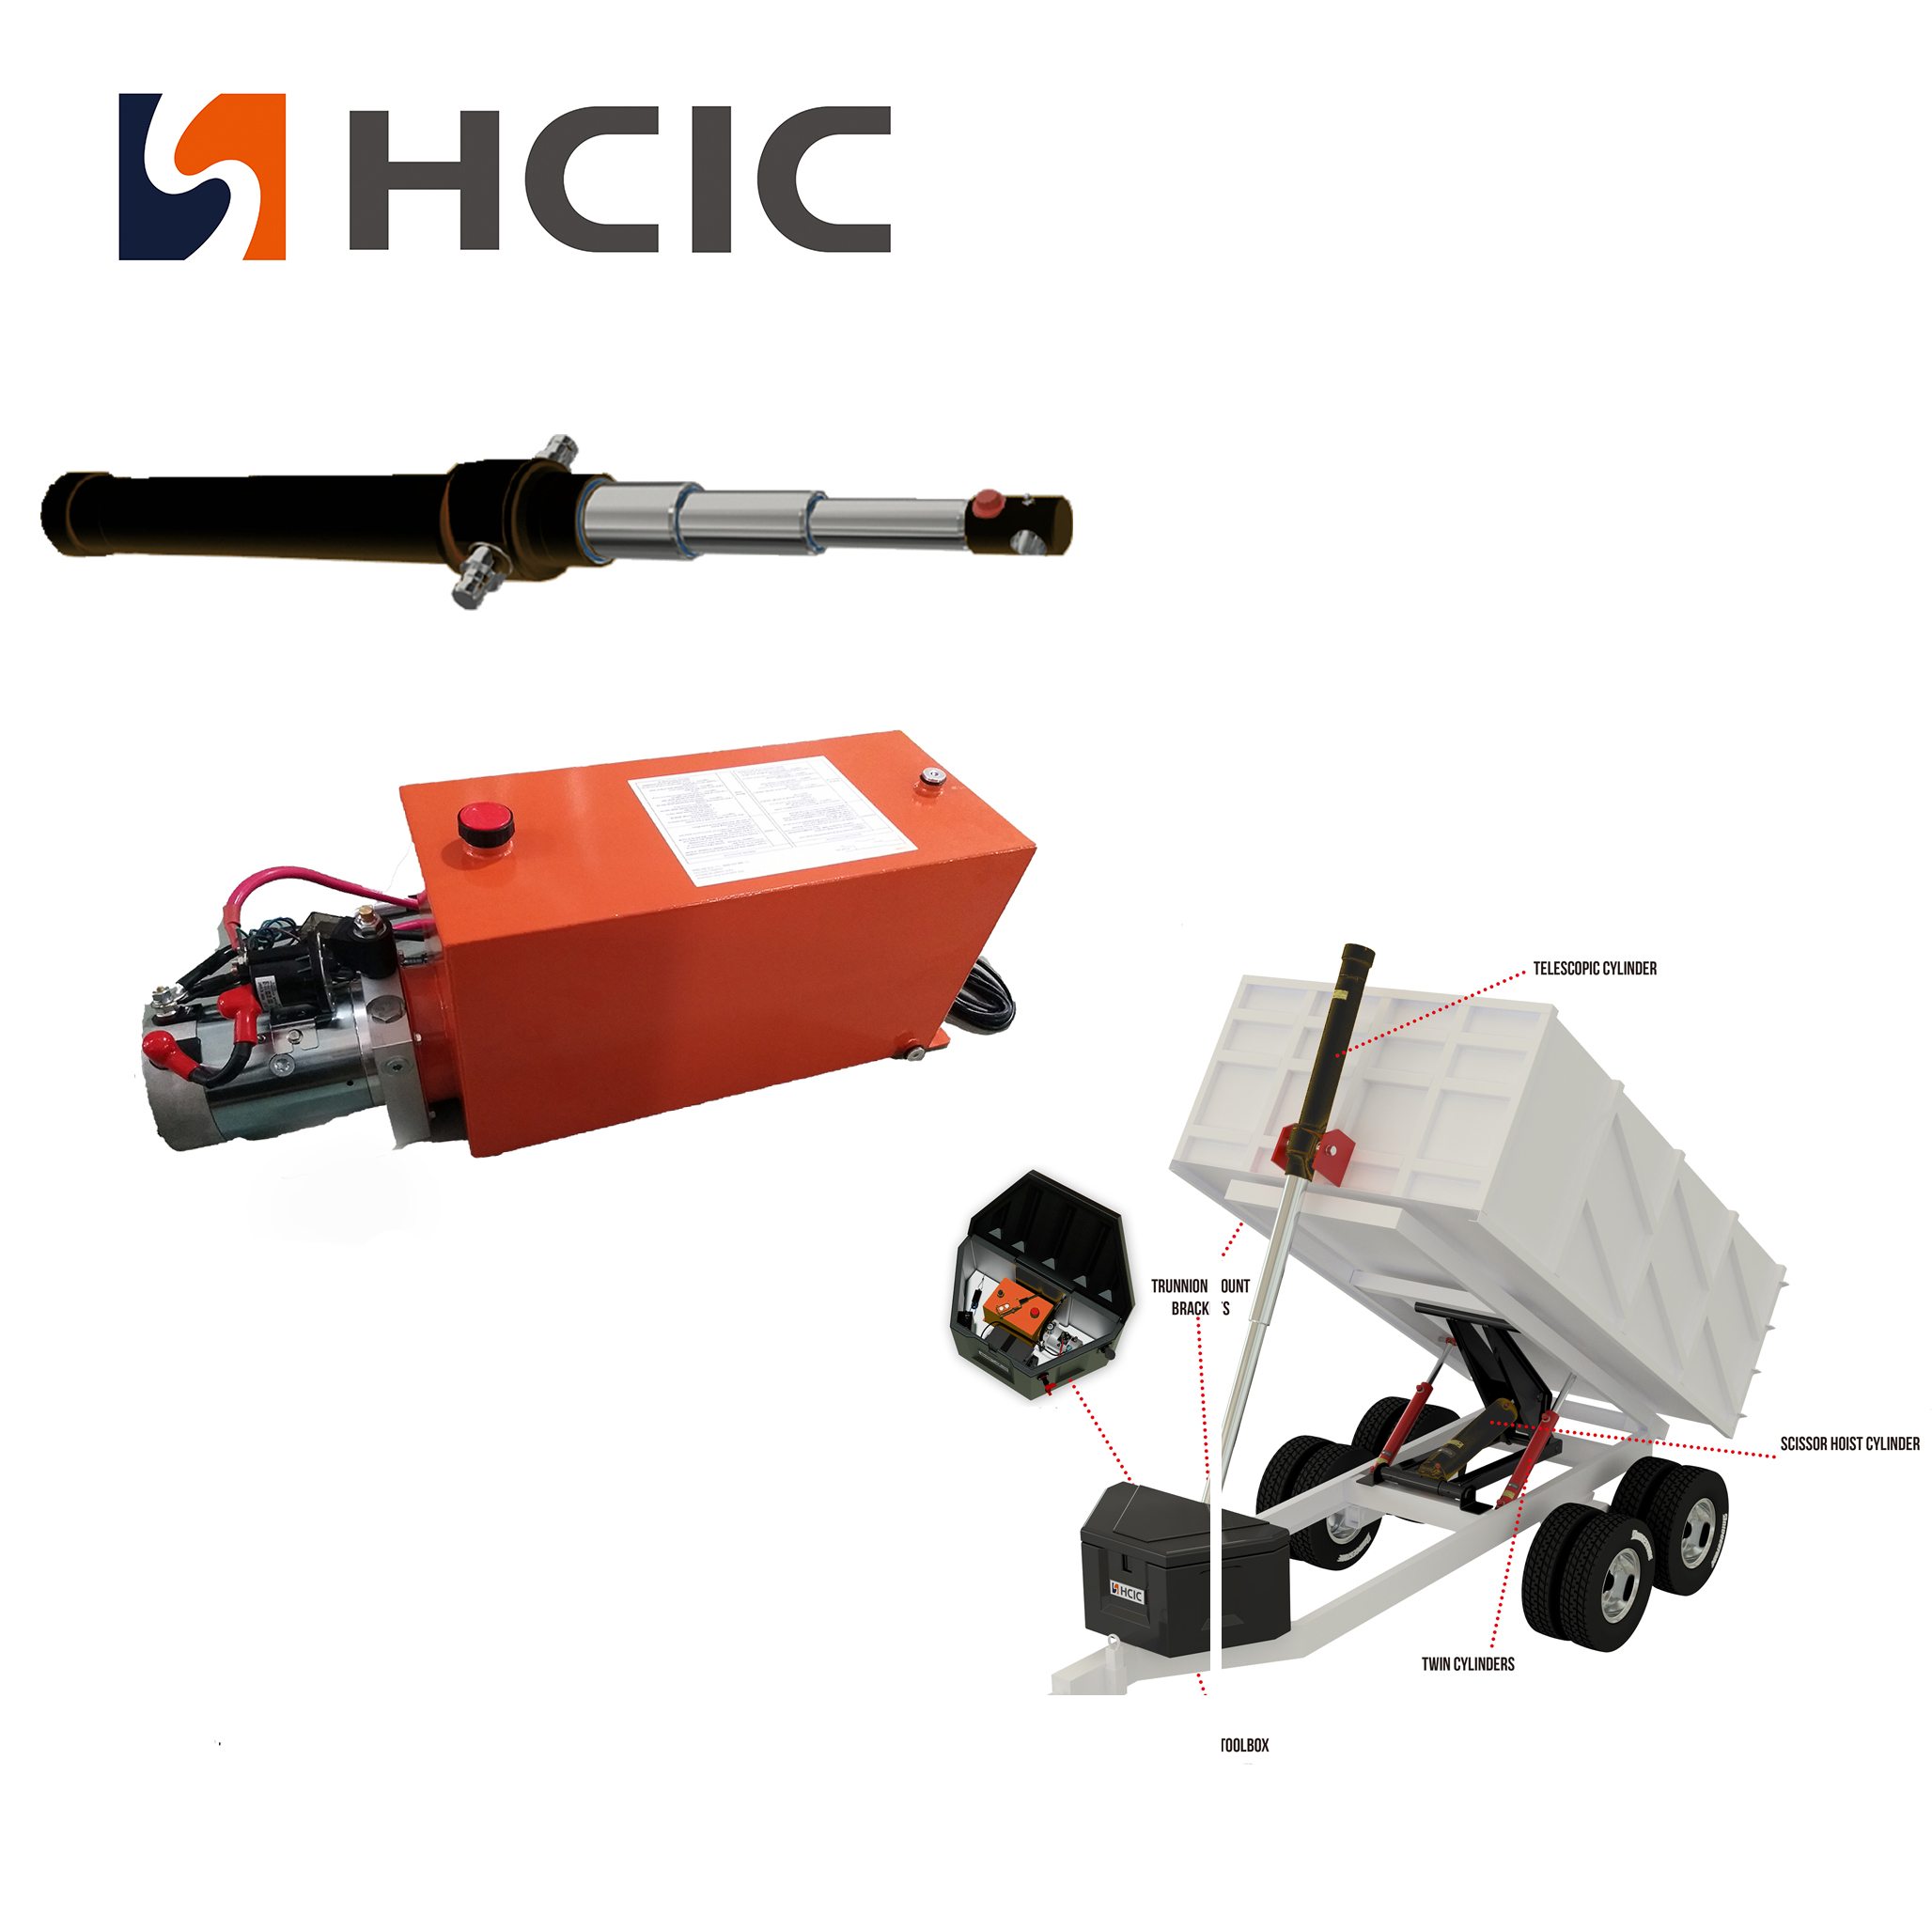 HCIC Unveils Compact and Powerful Hydraulic Cylinder and Power Unit for Small Trailers